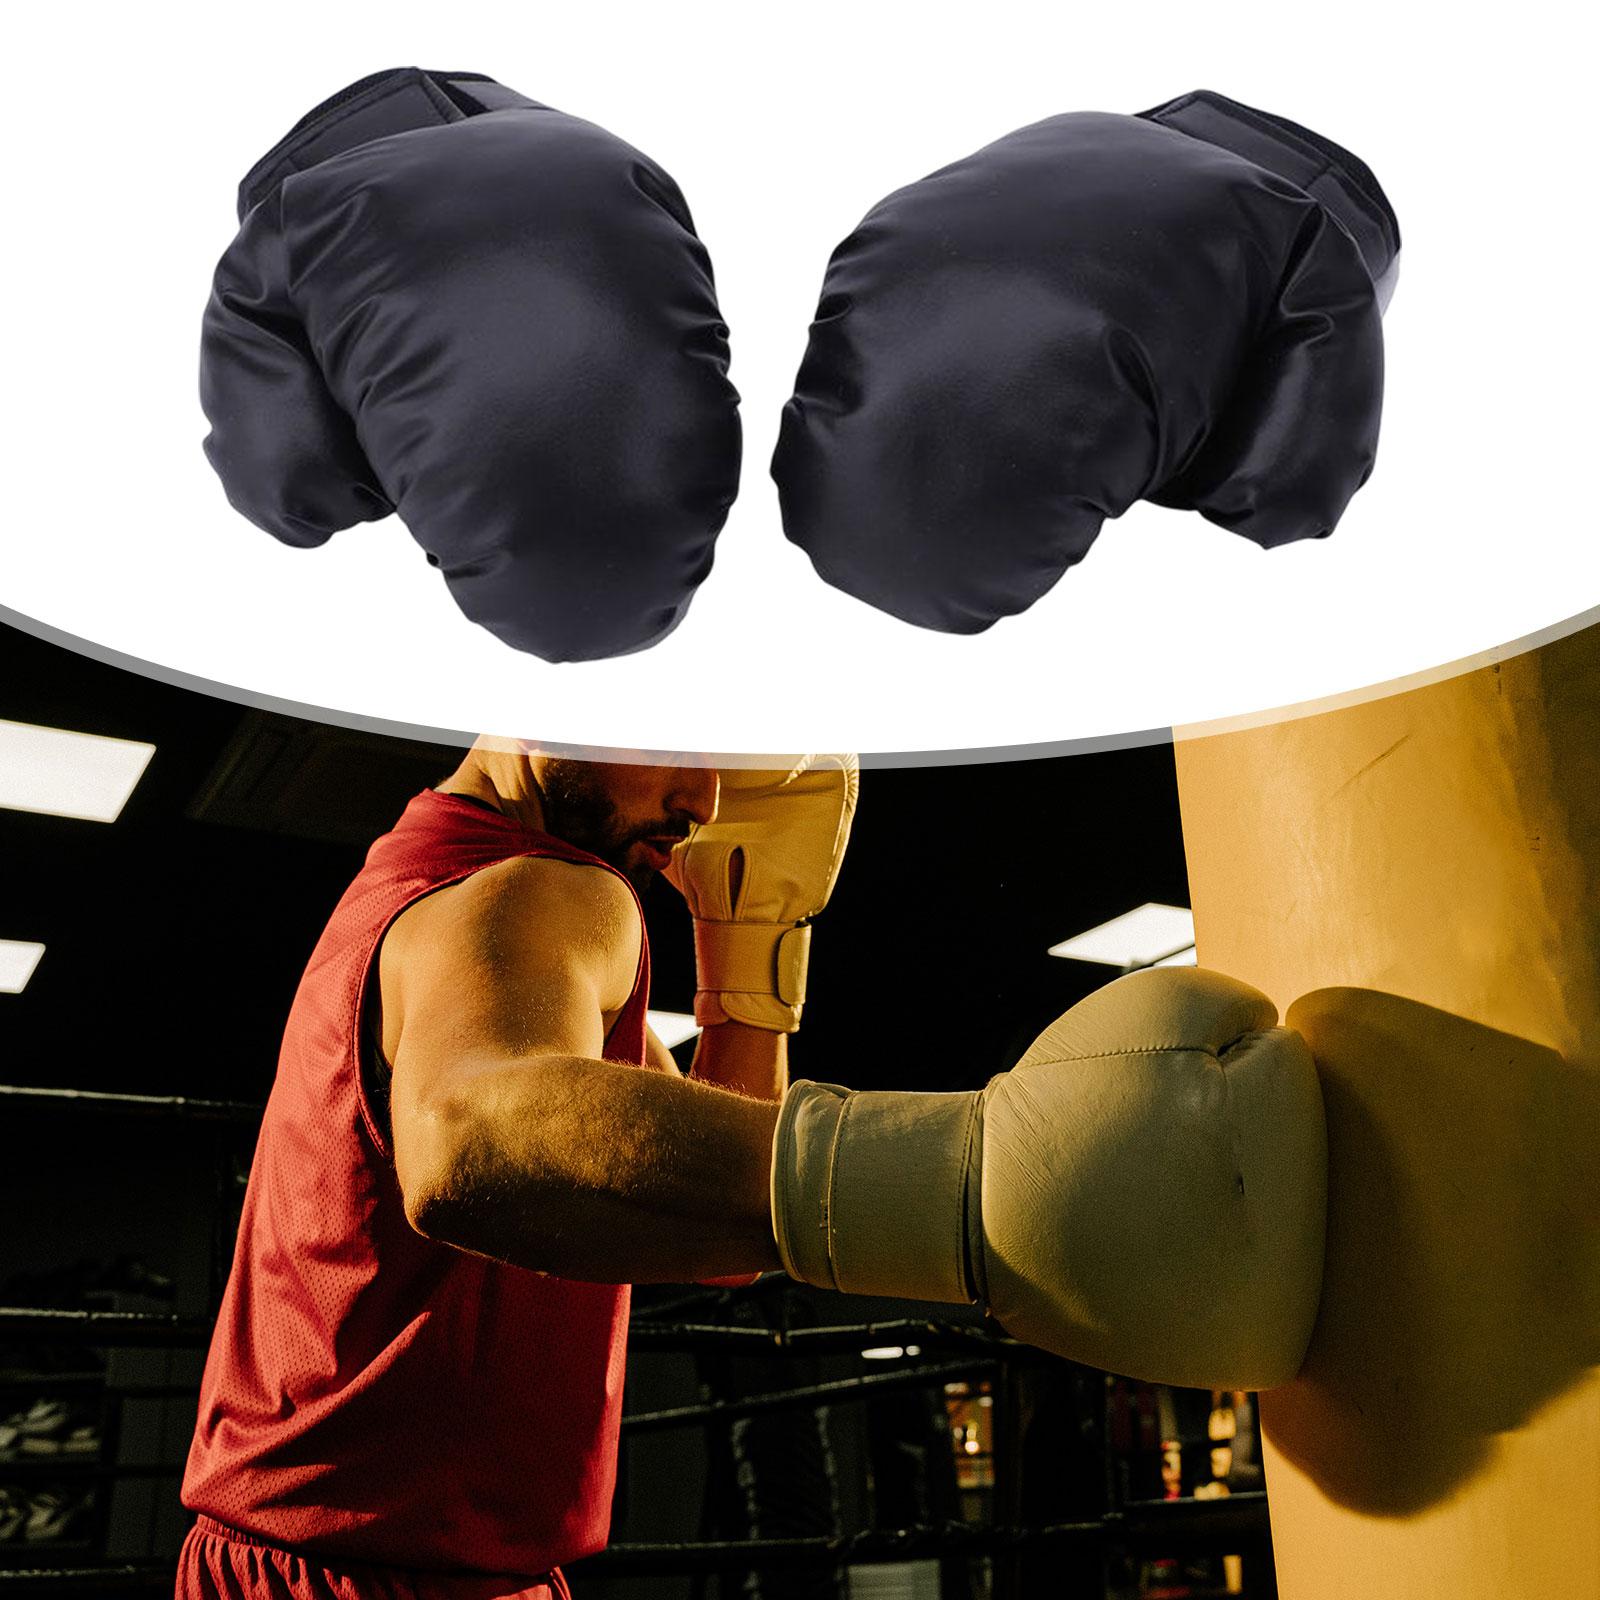 Mma Gloves Fitness Martial Arts Breathable Adult Children Kick Boxing Gloves Black Adult